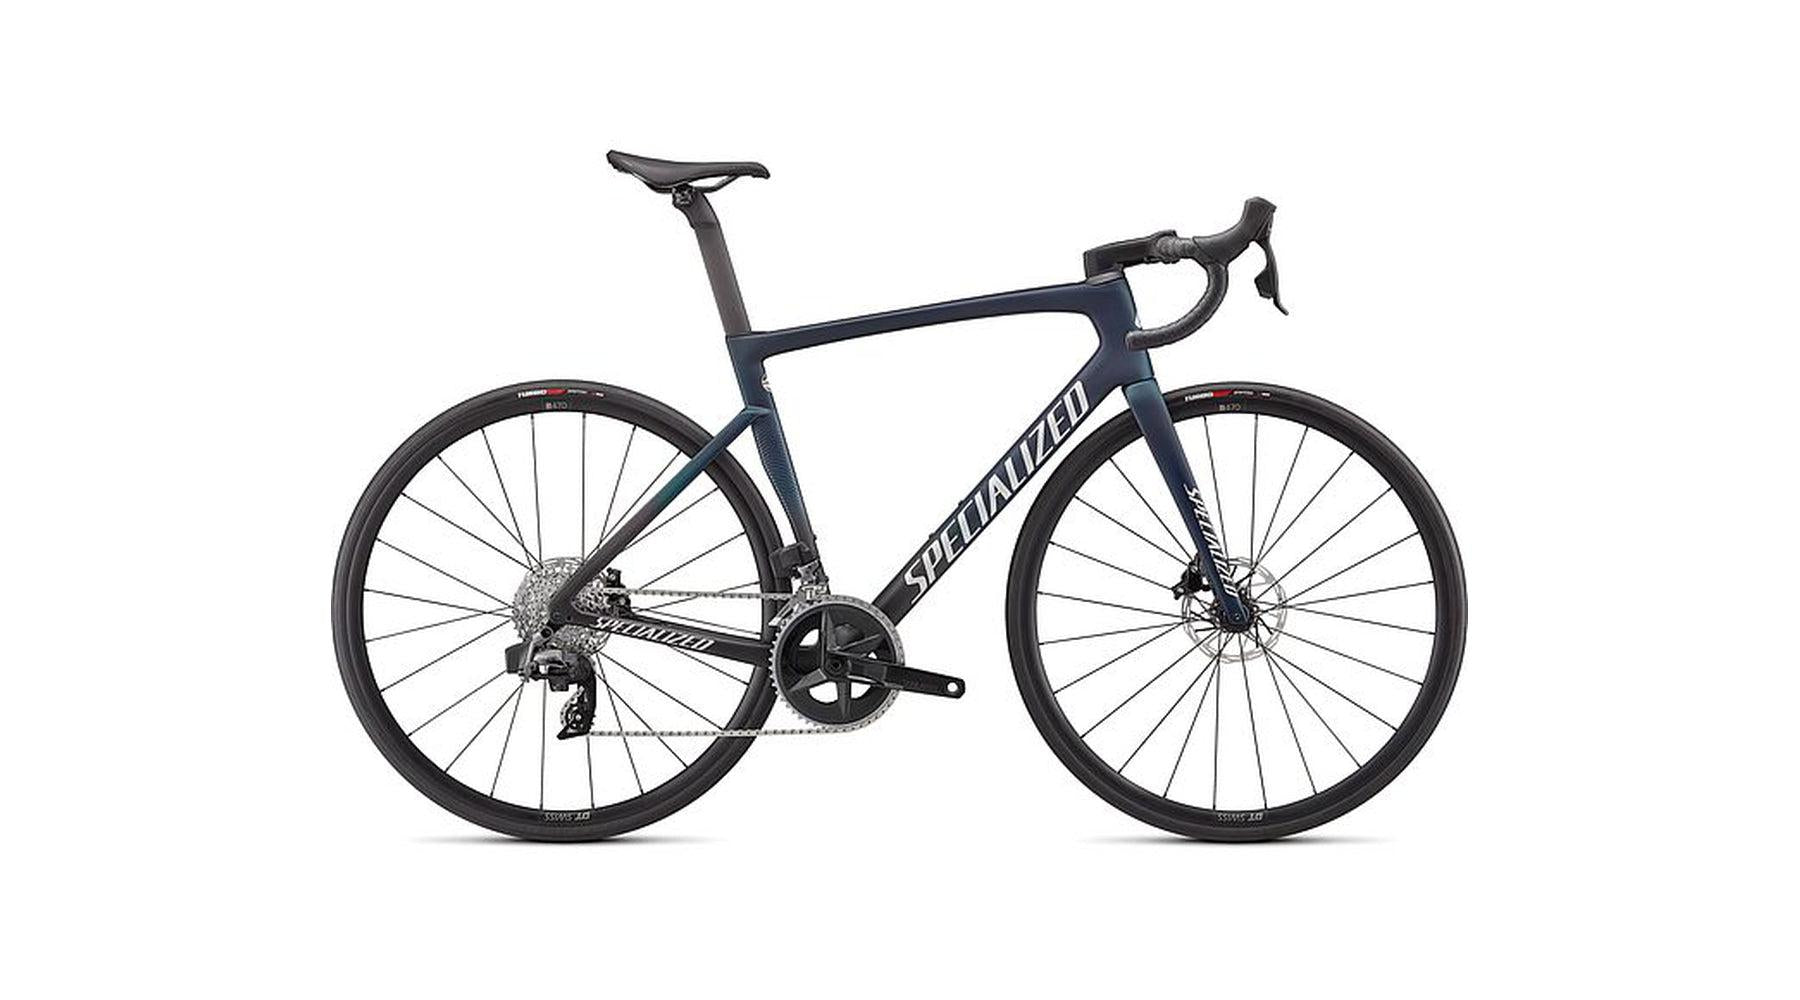 Tarmac SL7 Comp - Rival eTap AXS | completecyclist - The new Tarmac is designed to go fast, there's no if's, and's, or but's about thatÑbut it represents so much more than just aerodynamic prowess. With a